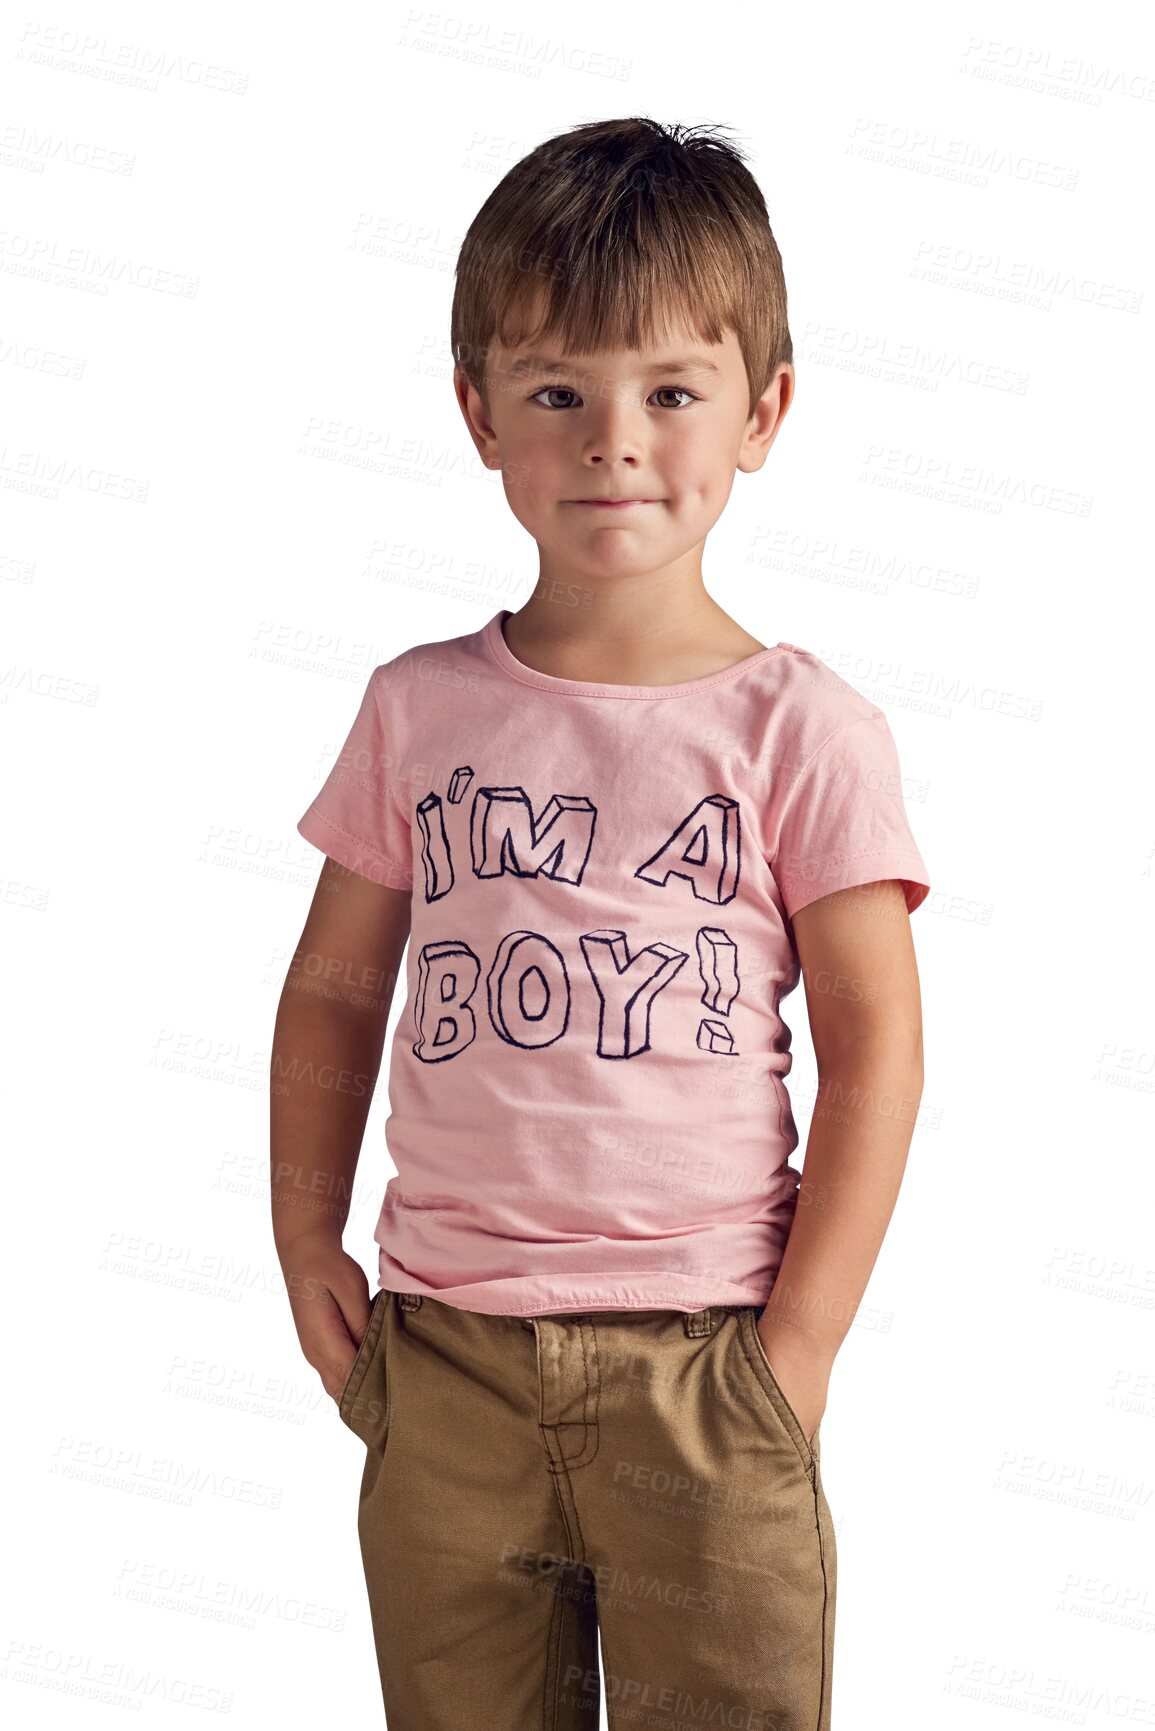 Buy stock photo Child, fashion and portrait of boy with shirt with gender equality isolated in transparent or png background. Pink, color and kid with happiness in style, outfit and affirmation message on clothes